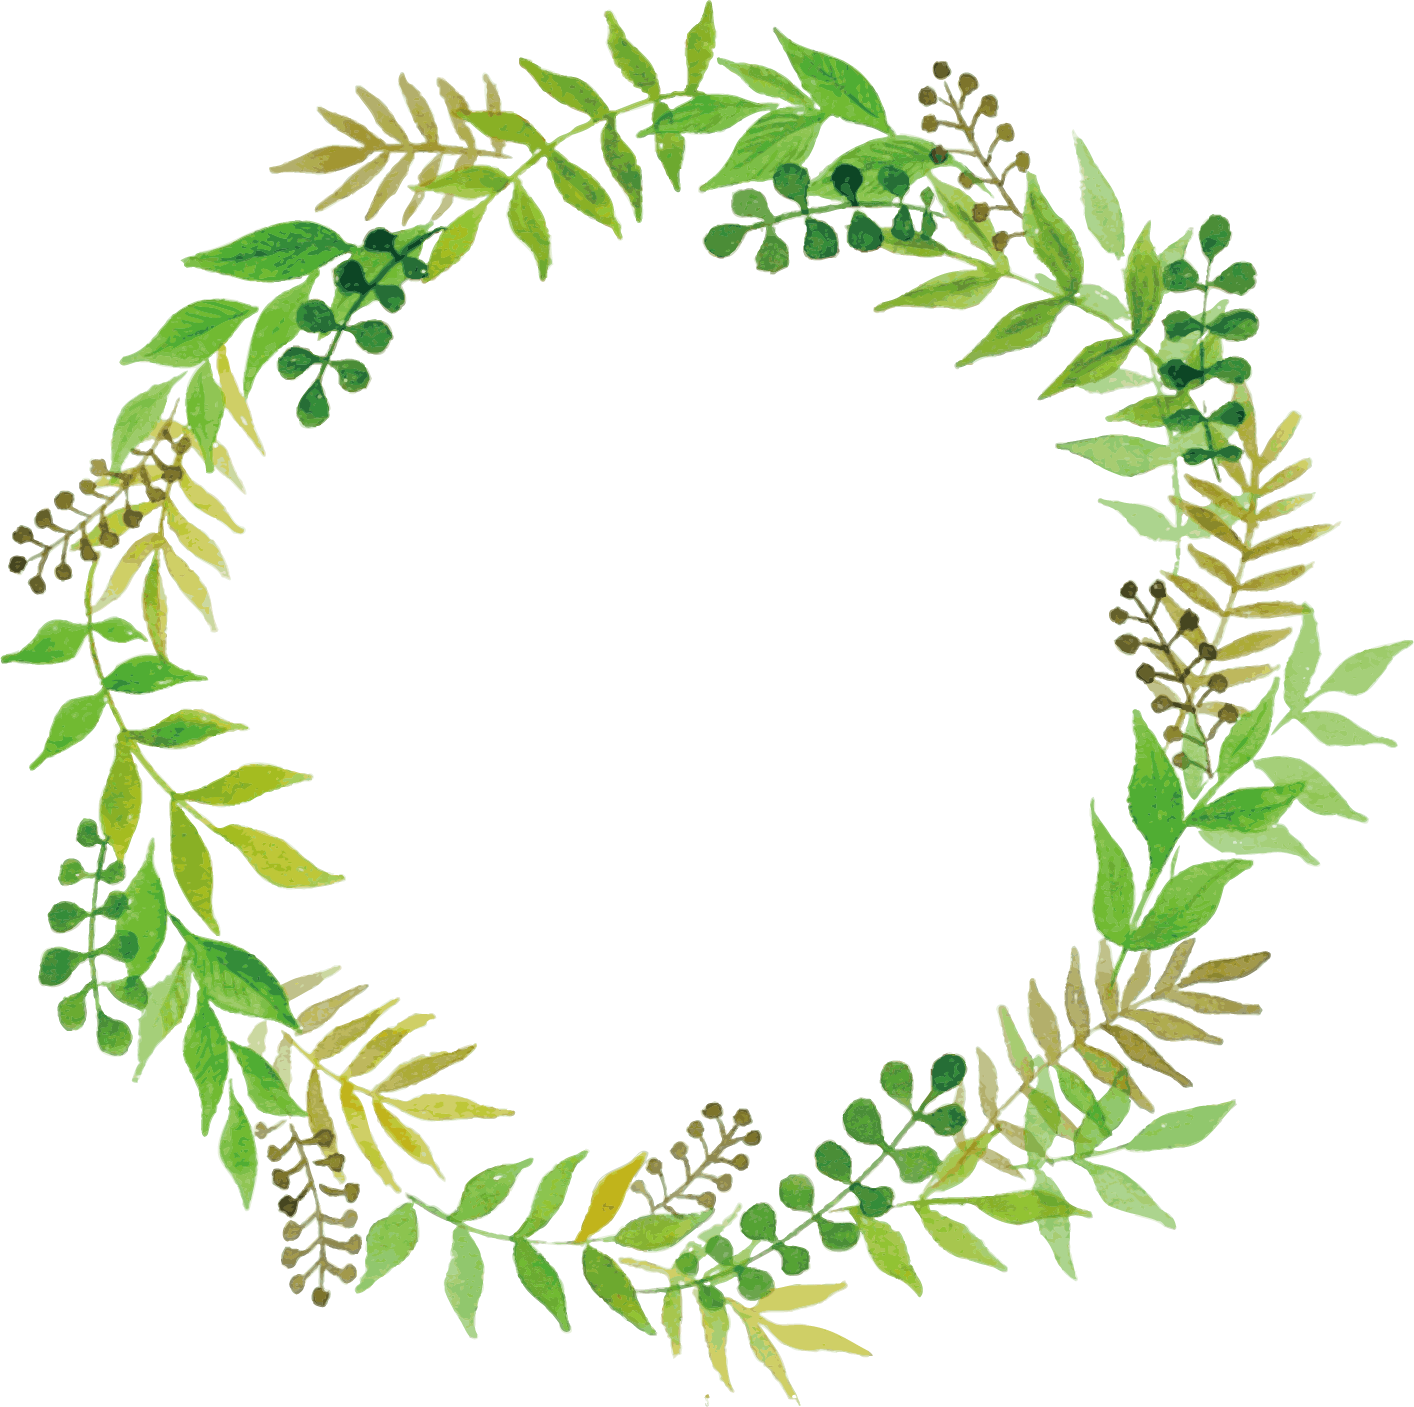 A Wreath Of Leaves And Branches